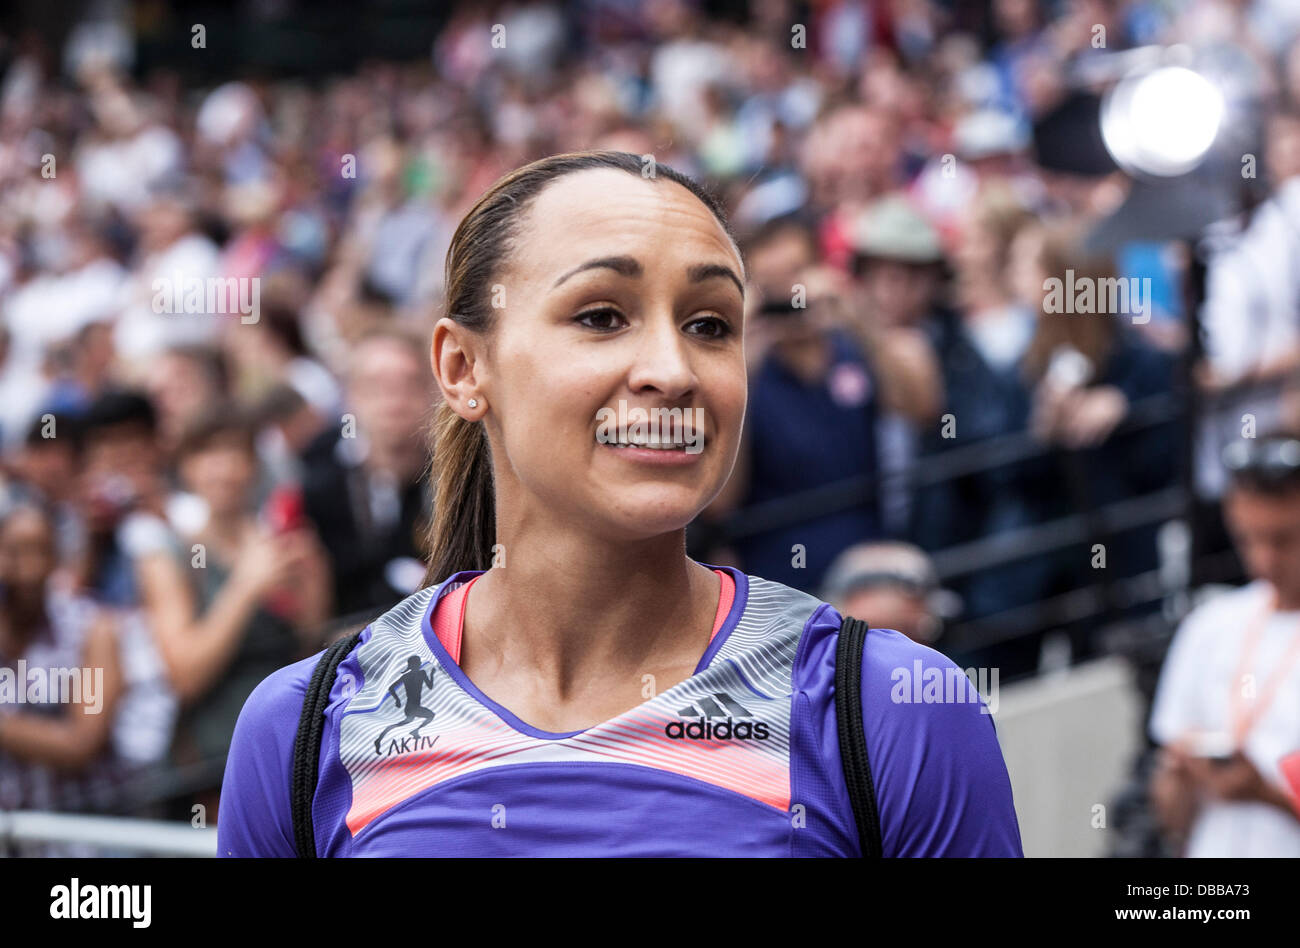 London Uk 27th July 2013 Olympic Gold Medalist Jessica Ennis At The Diamond League Games